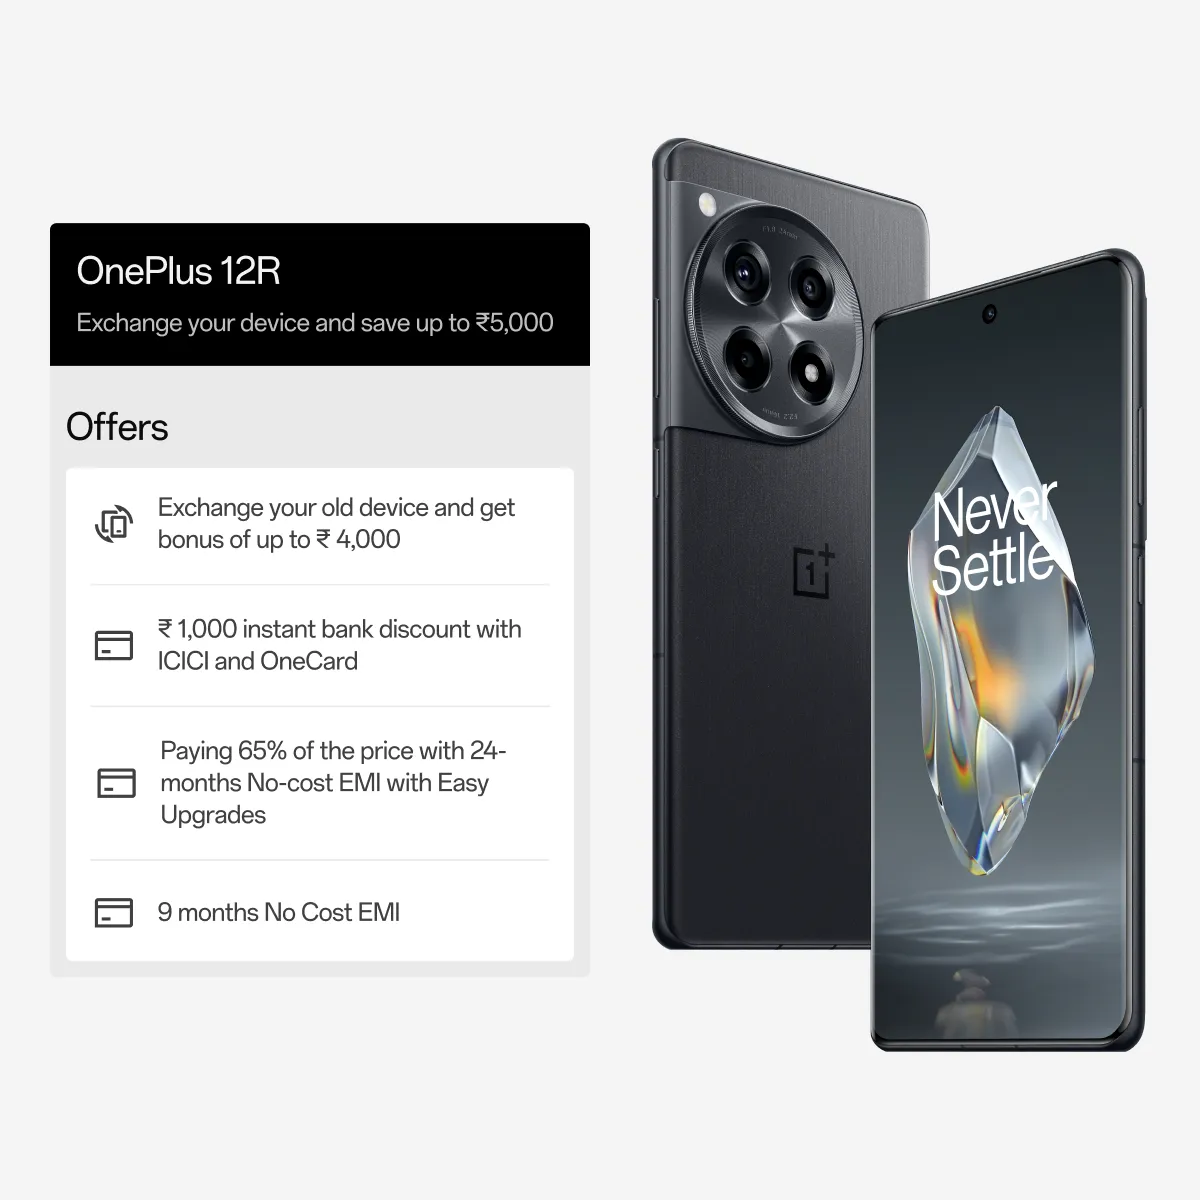 OnePlus 12R comes with UFS 3.1 storage, not UFS 4.0 : Does it make a difference?